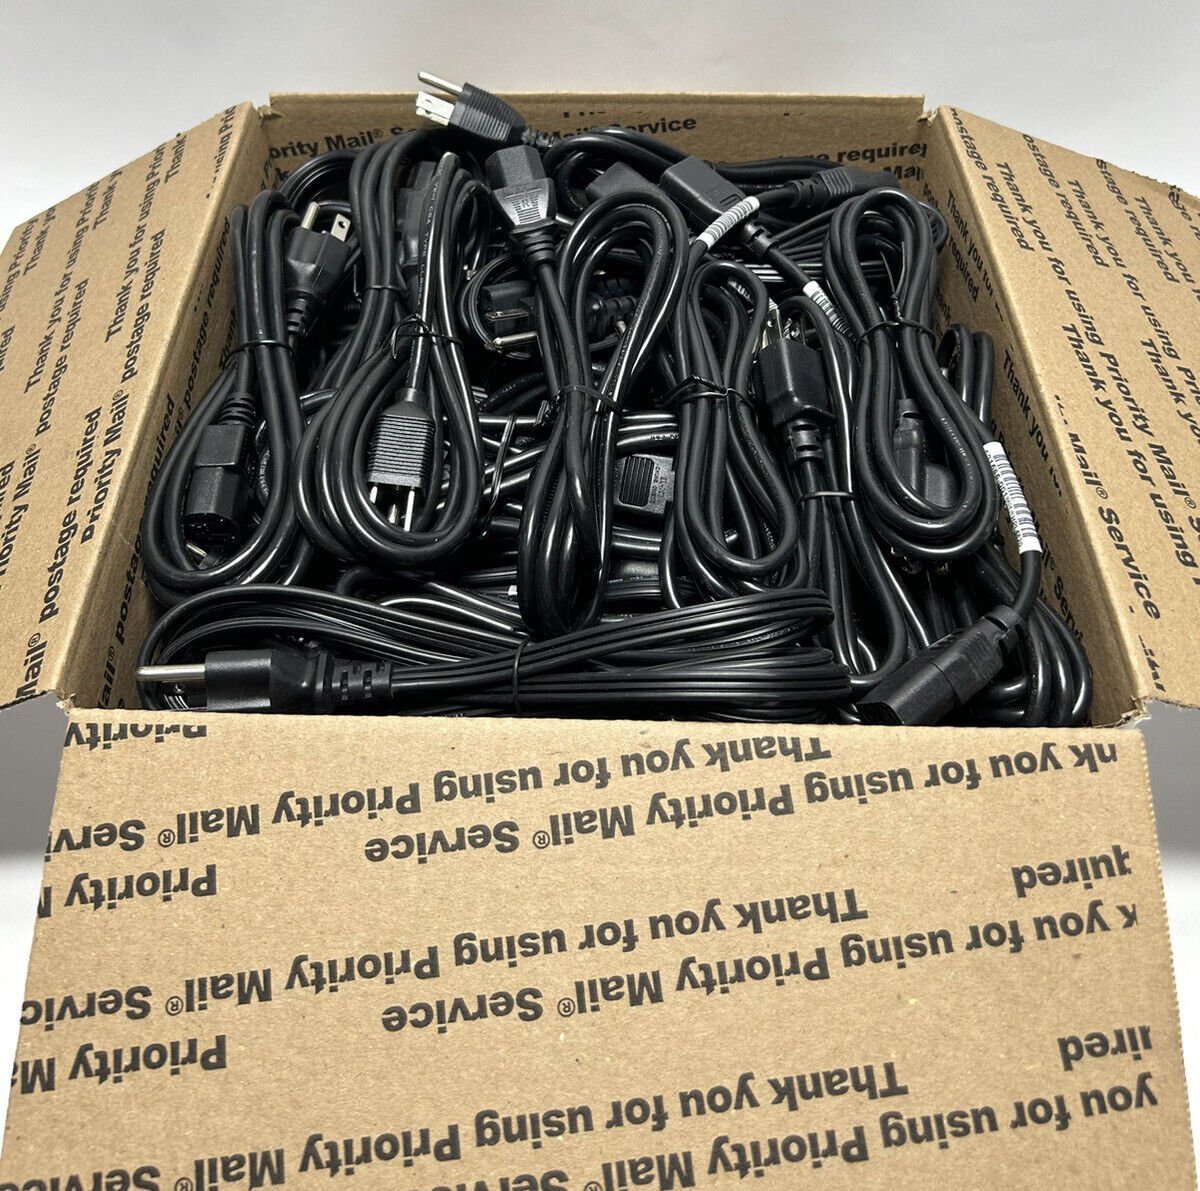 LOT OF 50 AC Power Cord Cable 3 Prong Plug 6FT Standard PC Computer Monitor NEW